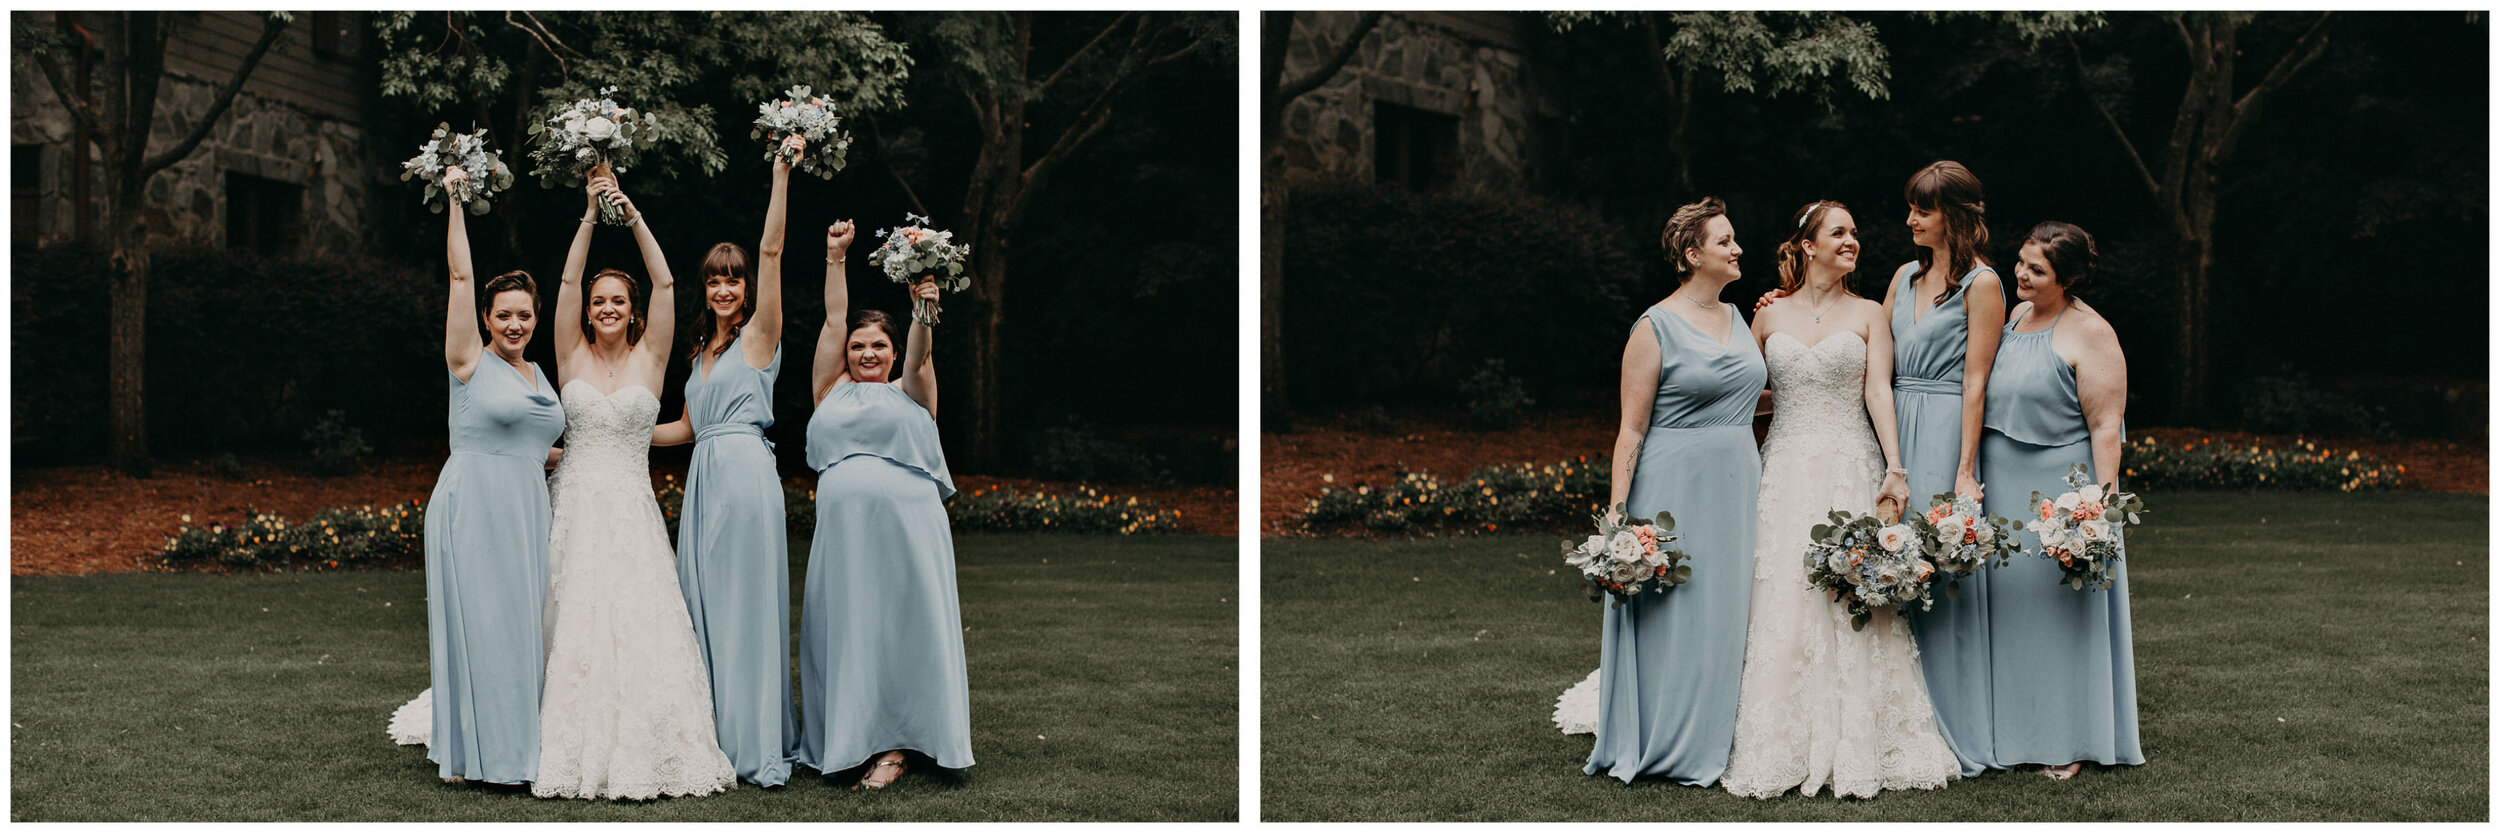 Christa & Ben's Wedding Day || Atlanta Spring Wedding at The Country Club of The South32.jpg